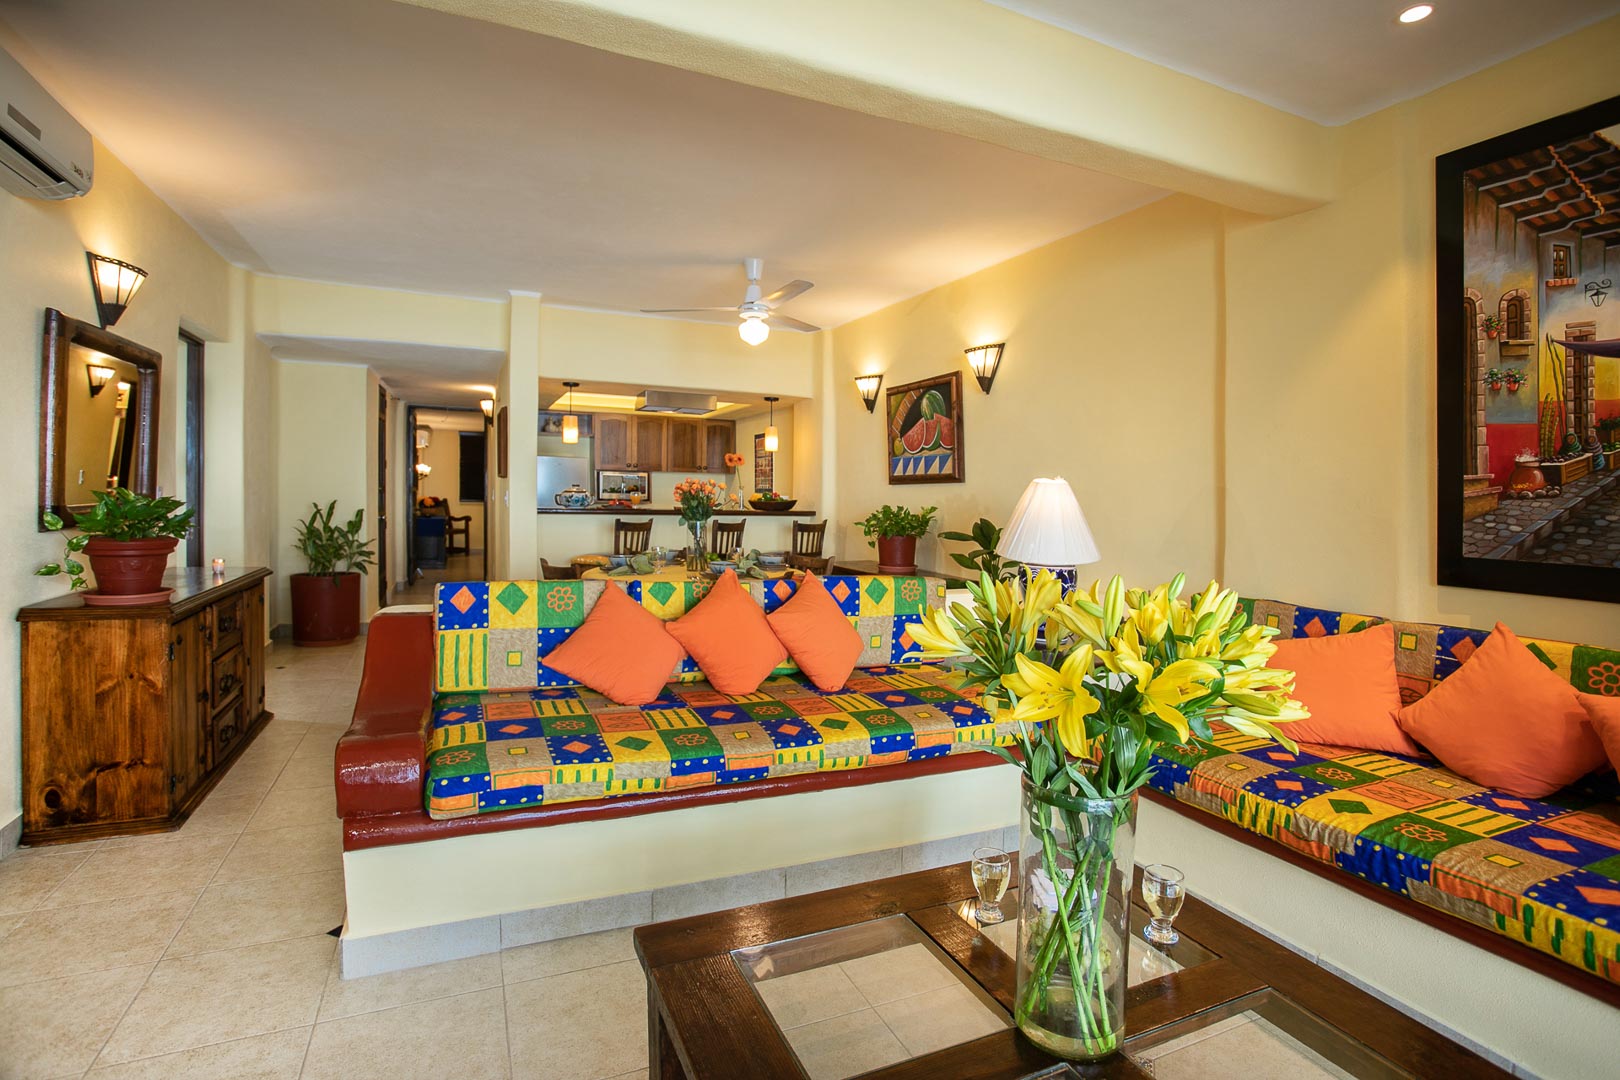 A spacious and colorful living room at TPI's Lindo Mar Resort in Puerto Vallarta, Mexico.